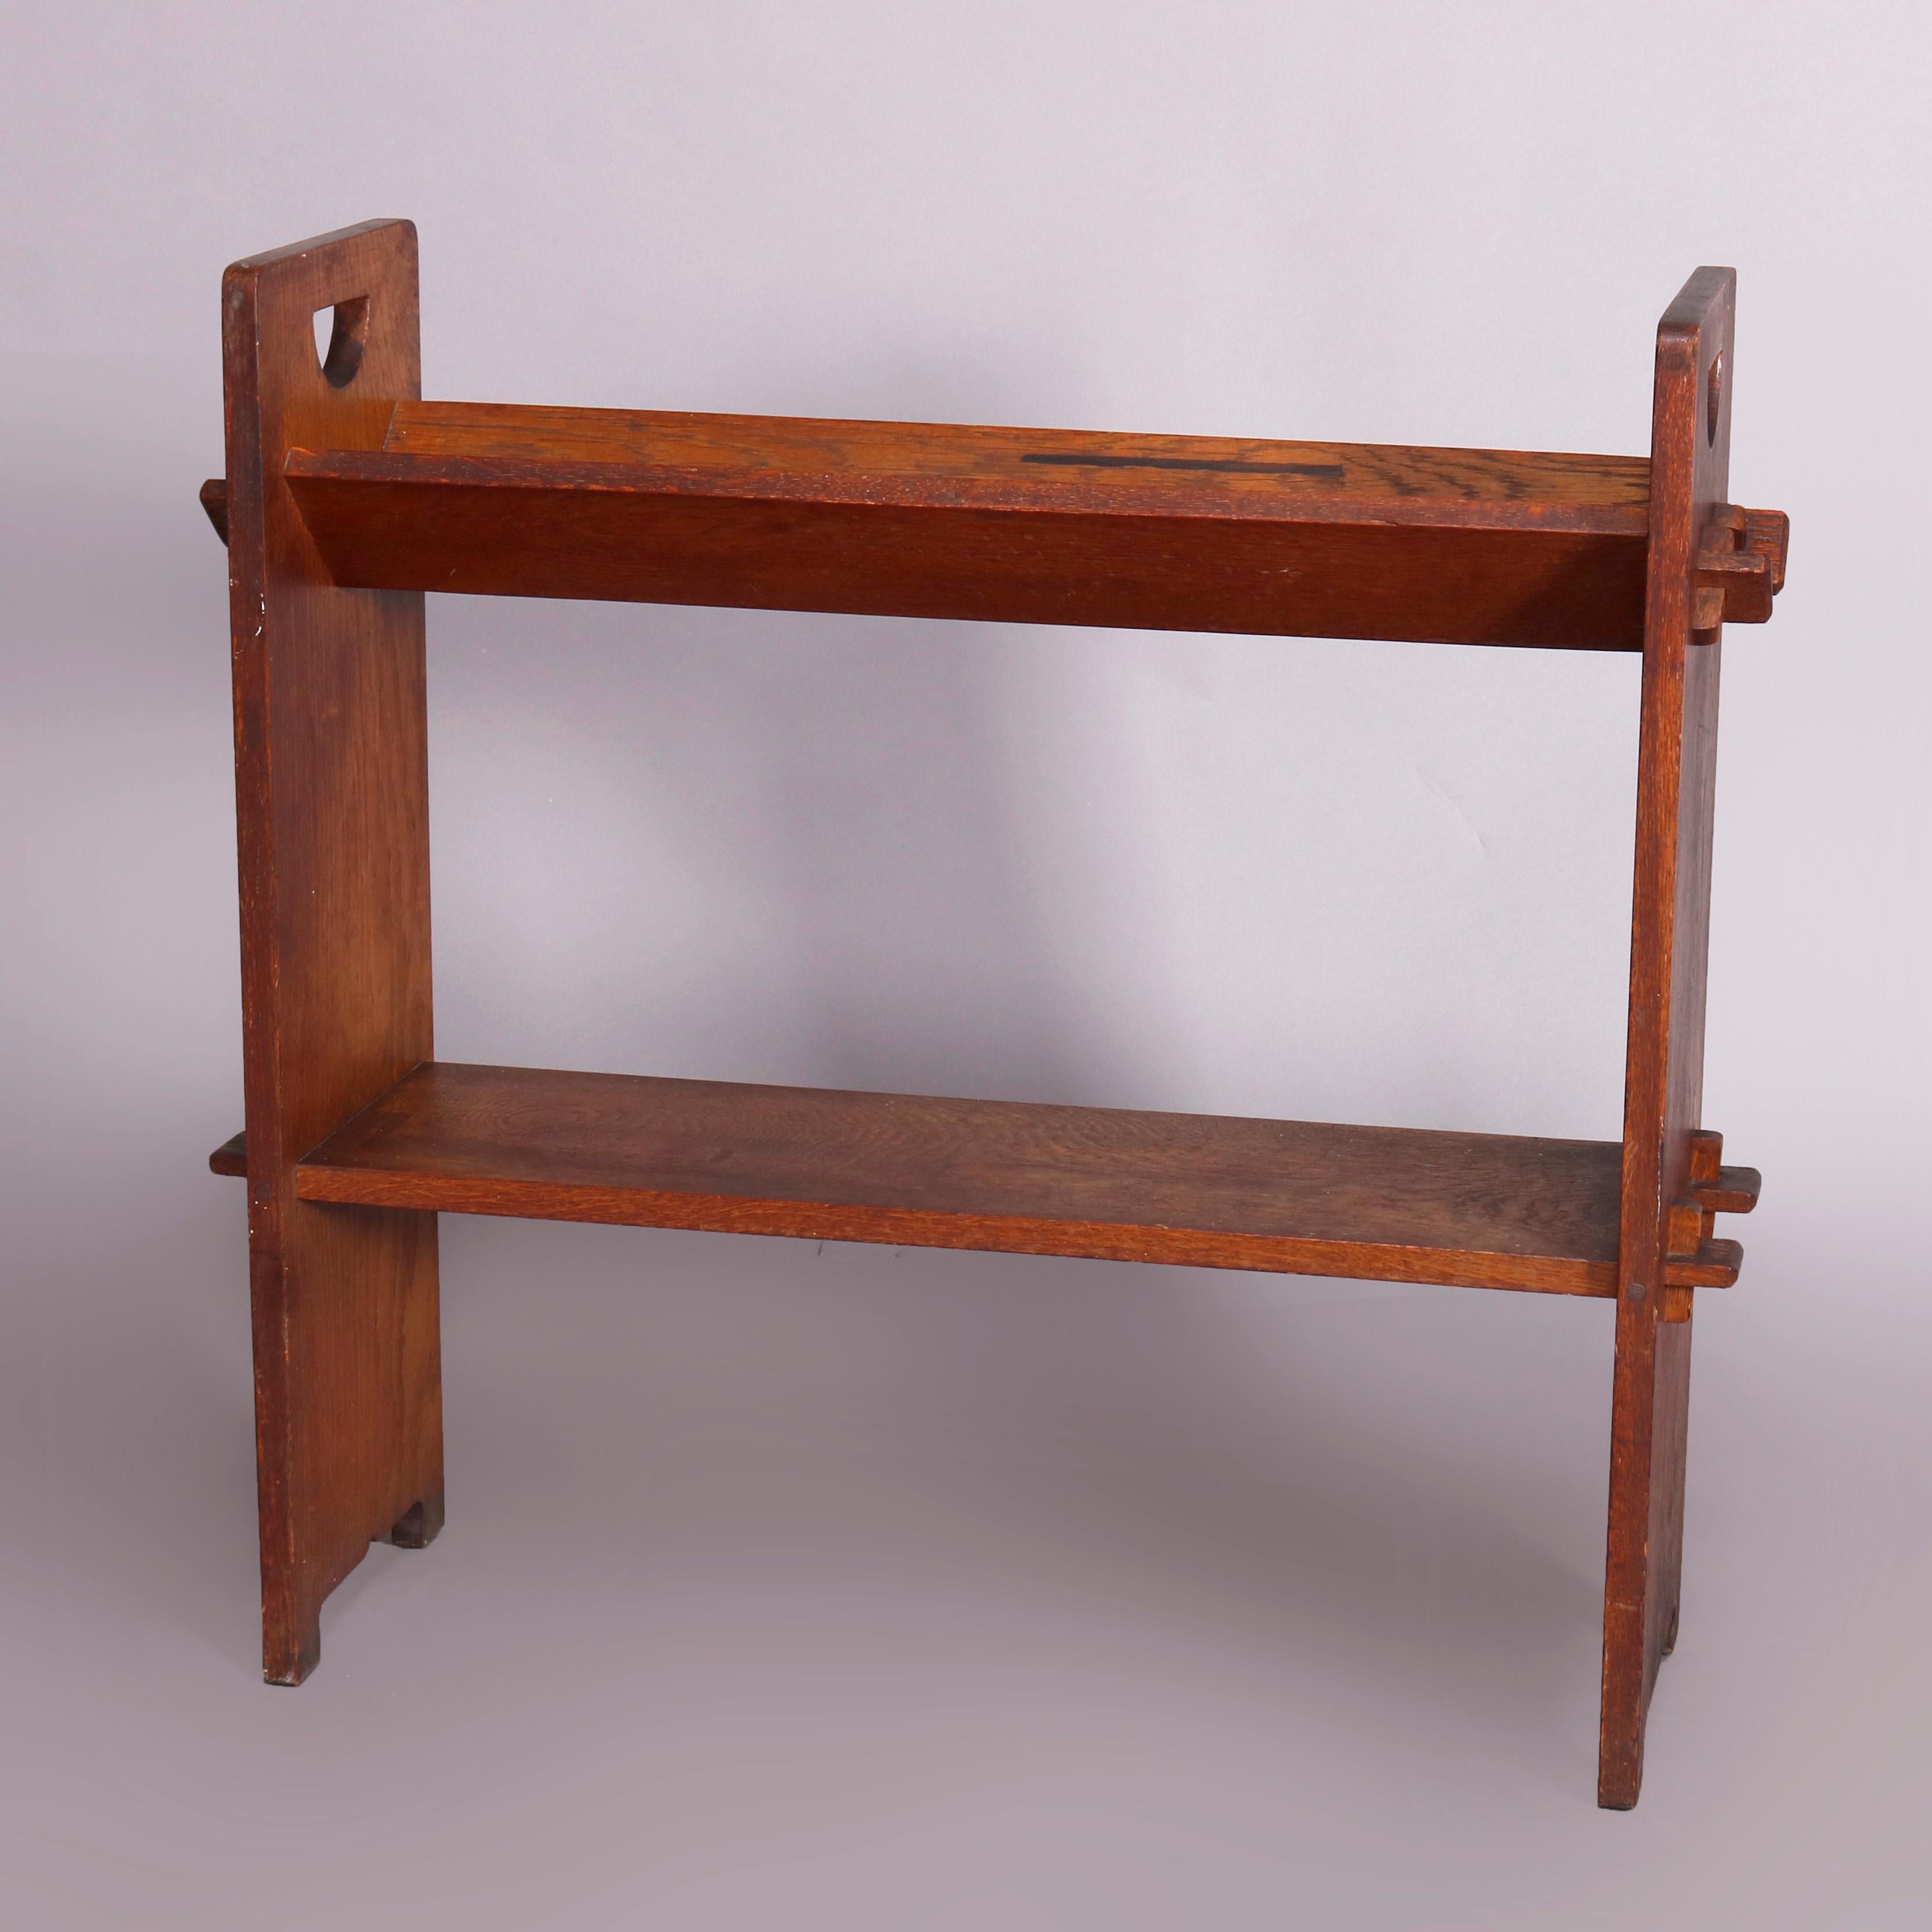 An antique Arts & Crafts Mission oak book stand by Gustav Stickley offers quarter sawn sides having cut-out D-handles with v-form trough upper and flat lower mortise and tenon shelves, circa 1910.

Measures: 30.75